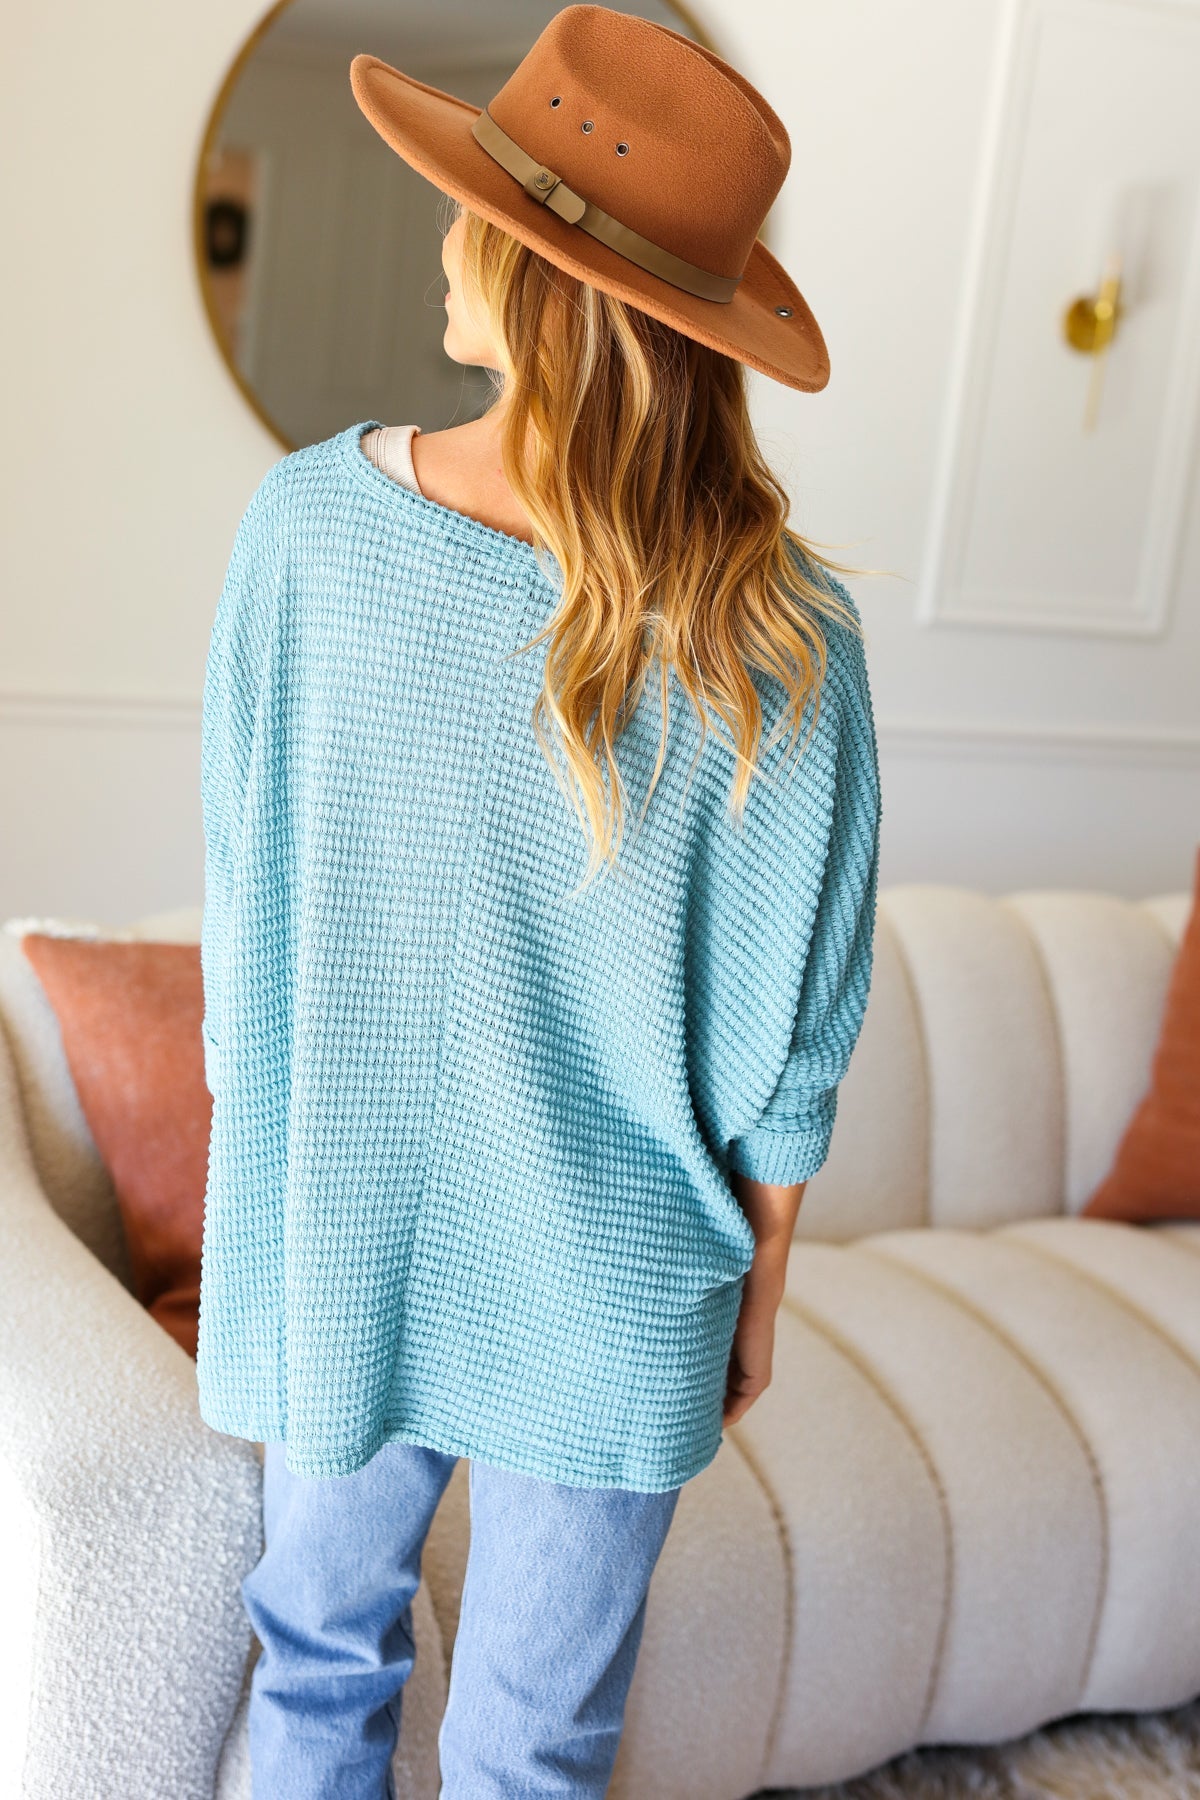 Just My Type Sweater in Dusty Teal